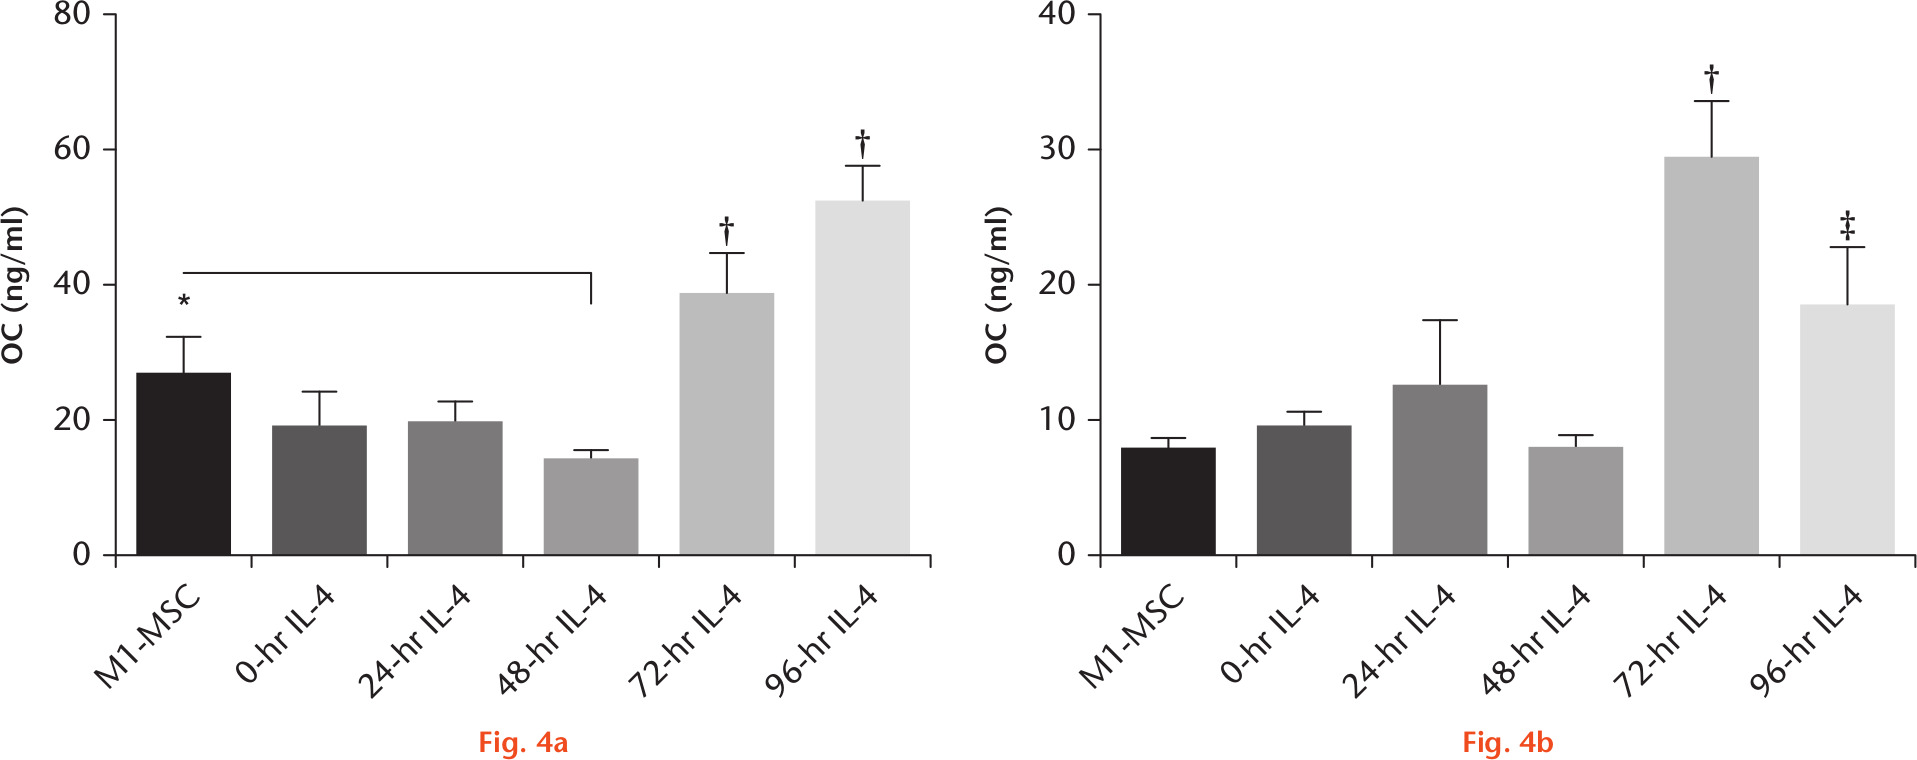 Fig. 4 
            Osteocalcin secretion via enzyme-linked immunosorbent assay (ELISA) at four weeks. a) The addition of interleukin (IL)-4 at 72 and 96 hours in the male coculture resulted in significantly higher osteocalcin secretion at four weeks than all other groups (p < 0.05 for 72-hour IL-4; p < 0.01 for 96-hour IL-4). b) In the female cells, adding IL-4 at 72 hours resulted in significantly higher osteocalcin secretion than all other groups (p < 0.01). Addition of IL-4 at 96 hours resulted in significantly decreased osteocalcin secretion compared with the 72-hour IL-4 group (p < 0.01). *Statistically significant difference from groups indicated by black bars. †Statistically significant difference from all other groups. ‡Statistically significant difference from all other groups except female 24-hour IL-4. M1, proinflammatory macrophage; MSC, mesenchymal stem cell.
          